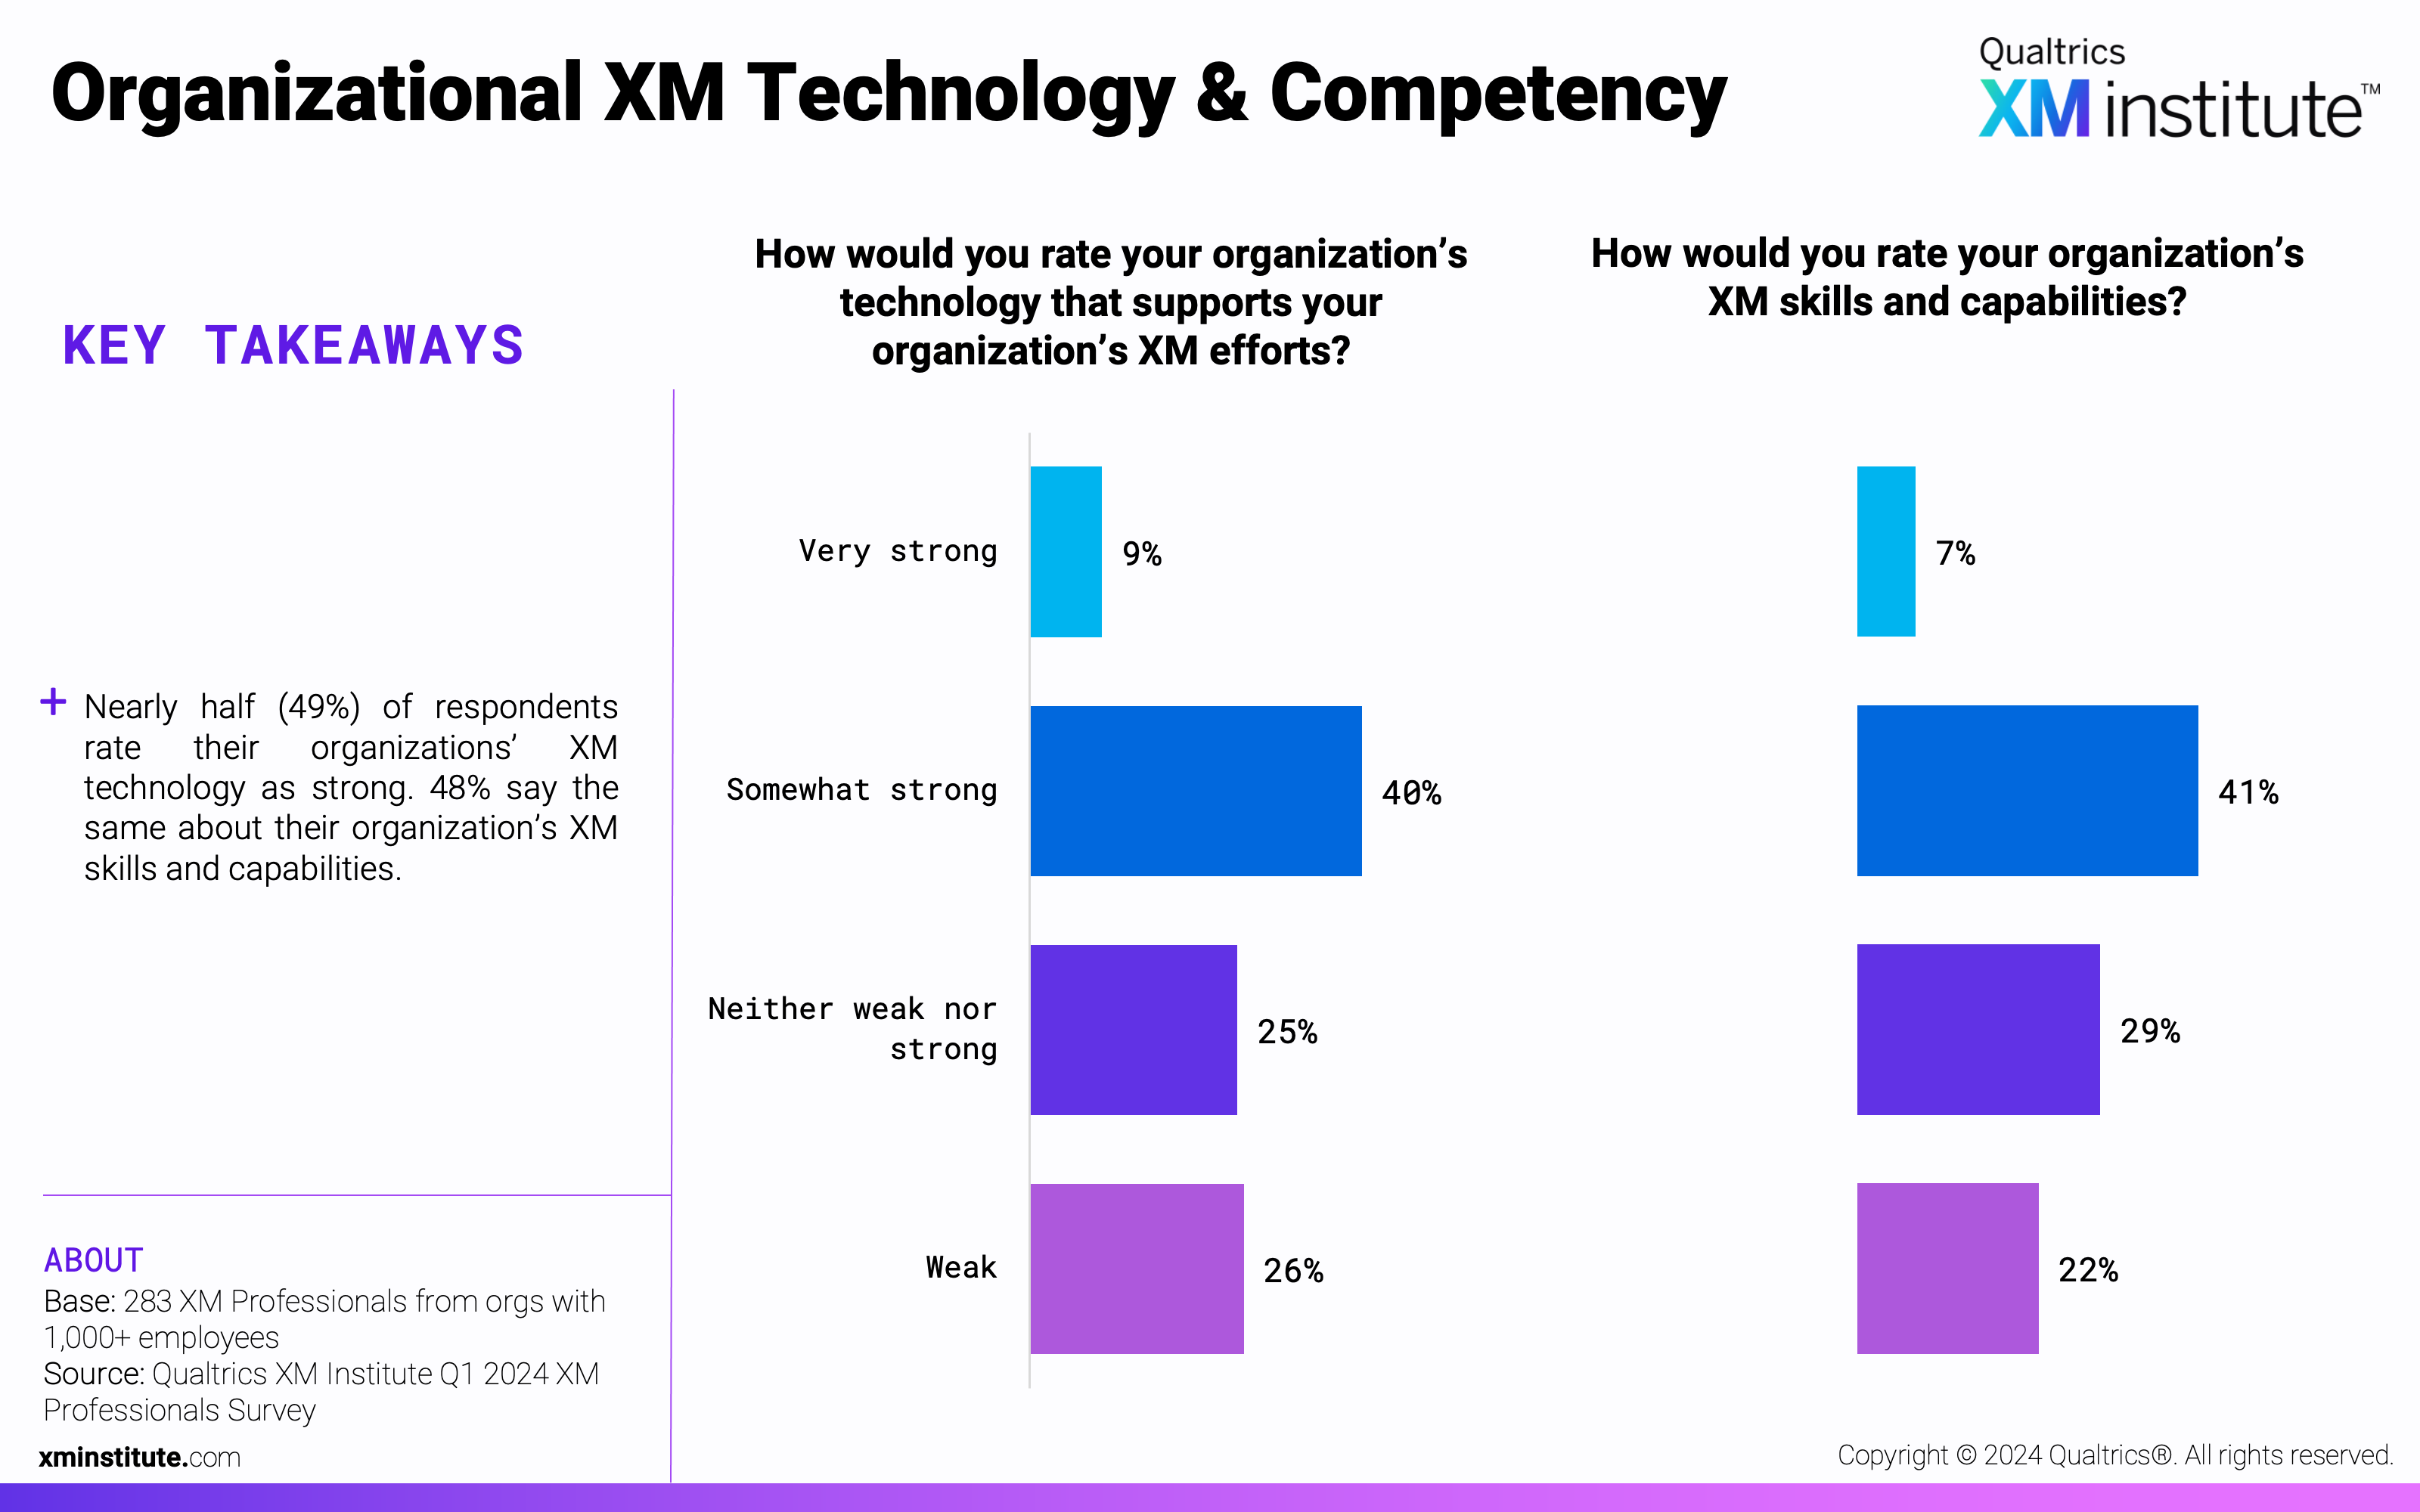 These charts show how respondents rate their organization's XM technology and XM skills and capabilities.